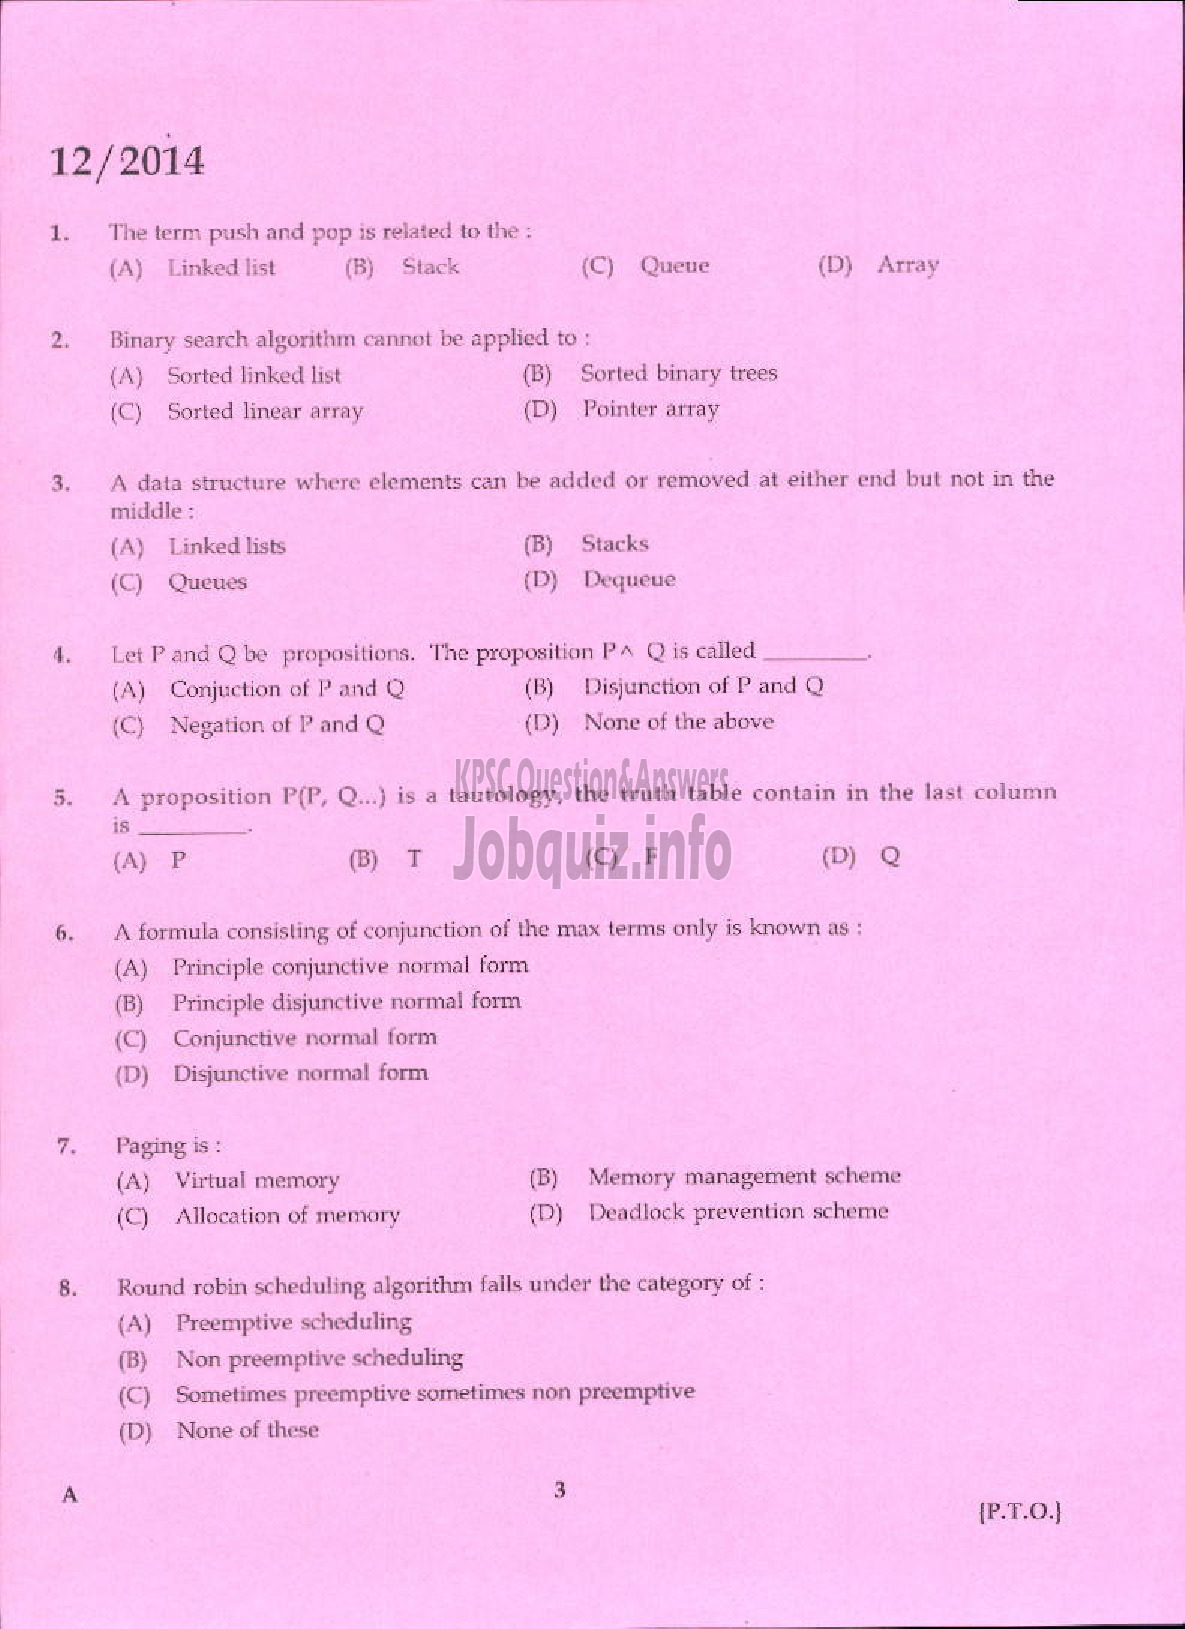 Kerala PSC Question Paper - VOCATIONAL INSTRUCTOR IN COMPUTER APPLICATION VHSE-1